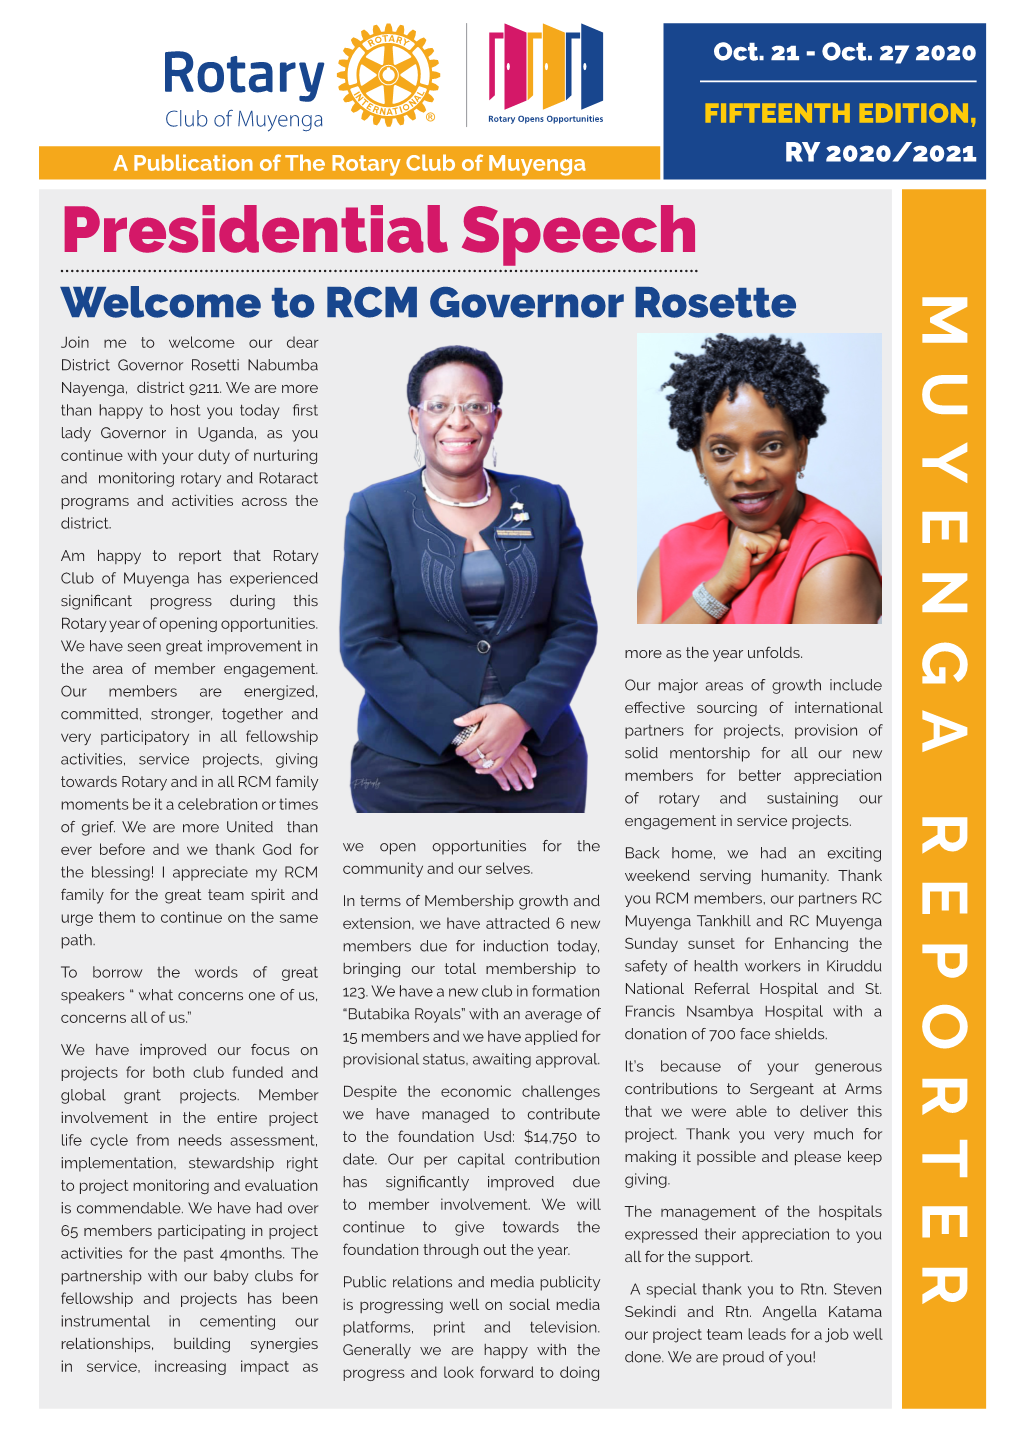 Presidential Speech Welcome to RCM Governor Rosette MUYENGA REPORTER Join Me to Welcome Our Dear District Governor Rosetti Nabumba Nayenga, District 9211